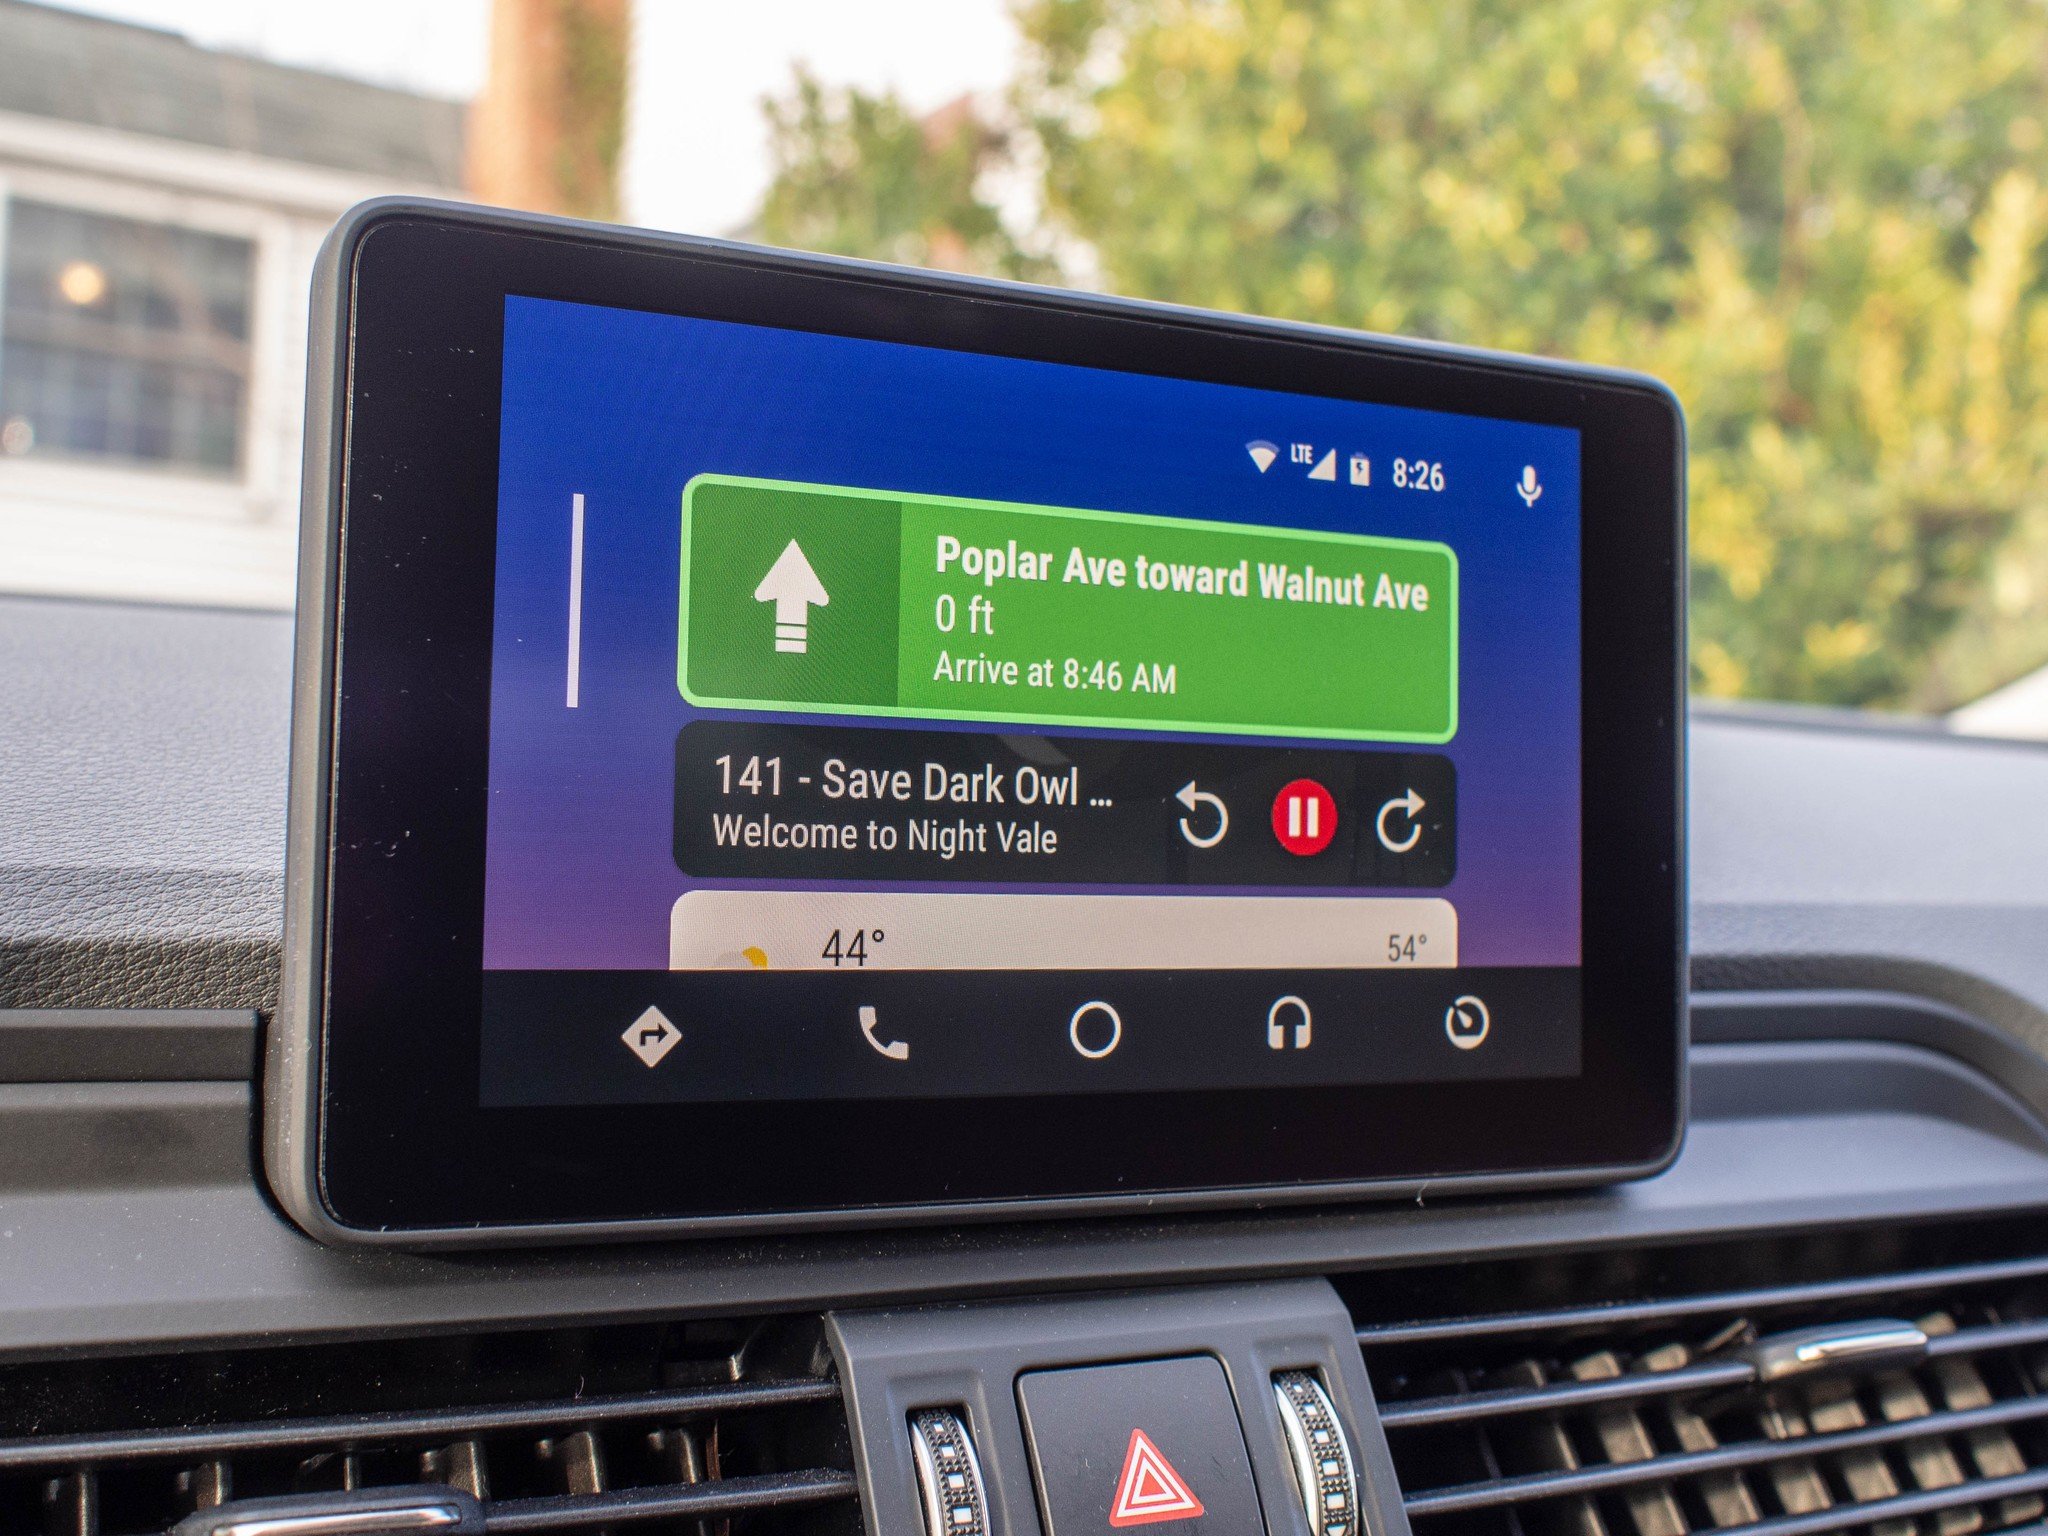 Android Auto without a touch screen is weird, but I kinda dig it